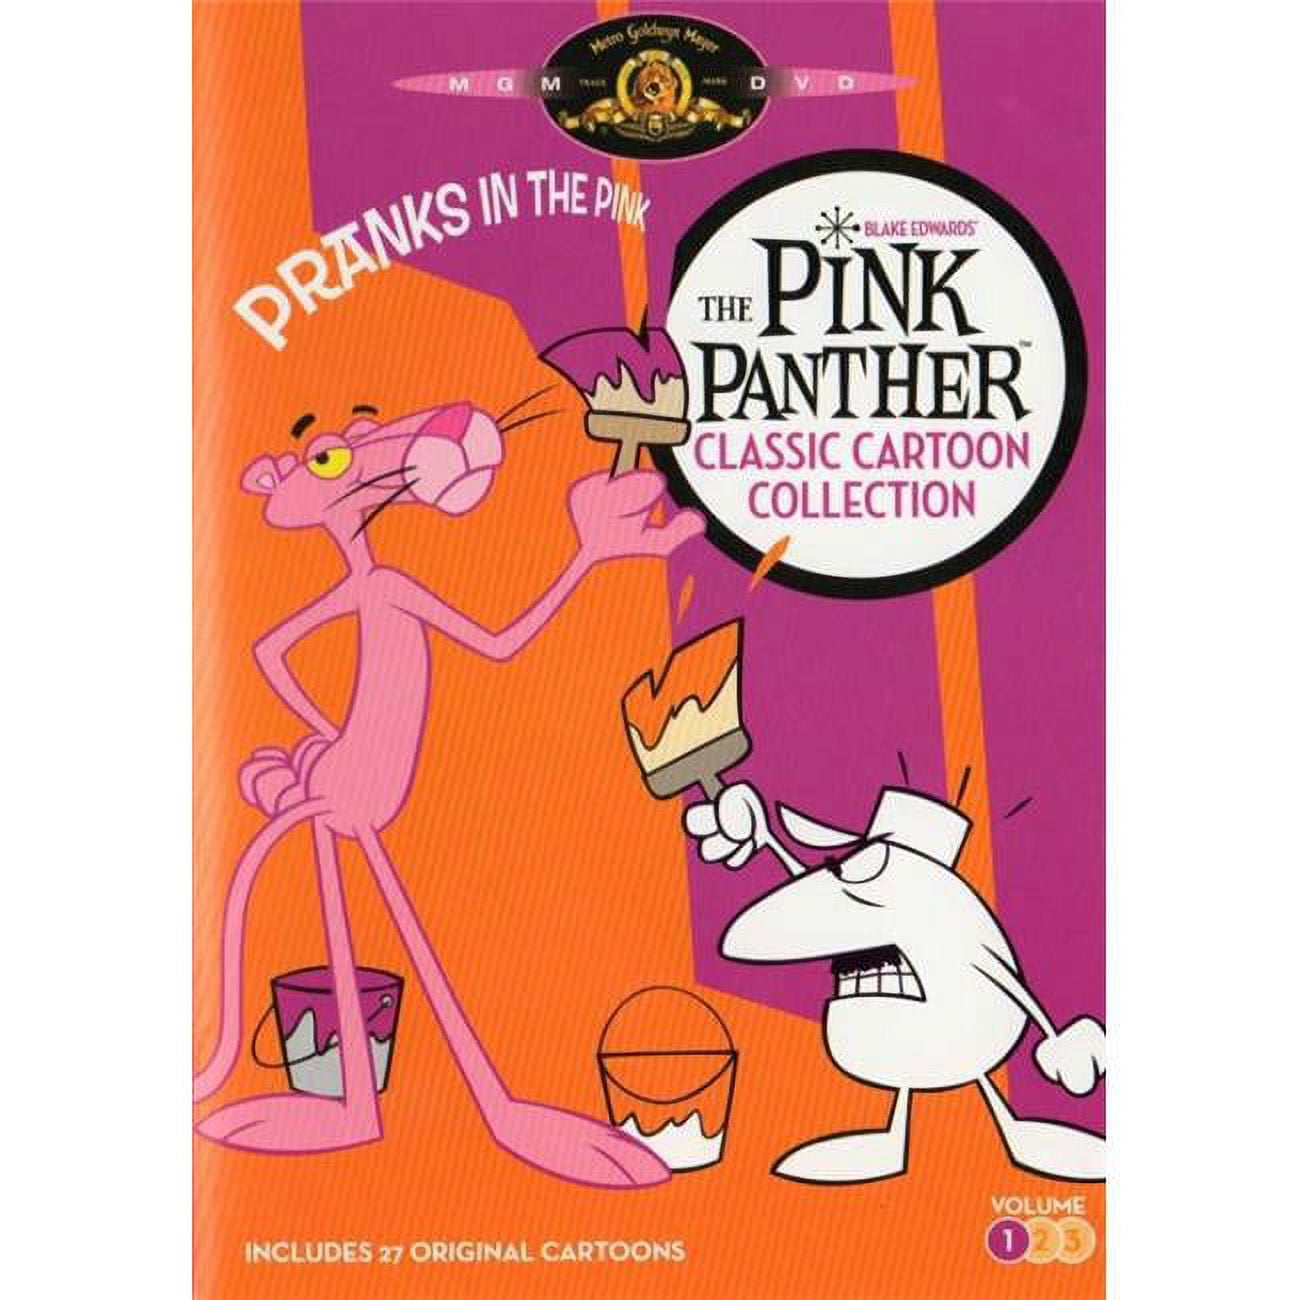 the pink panther show